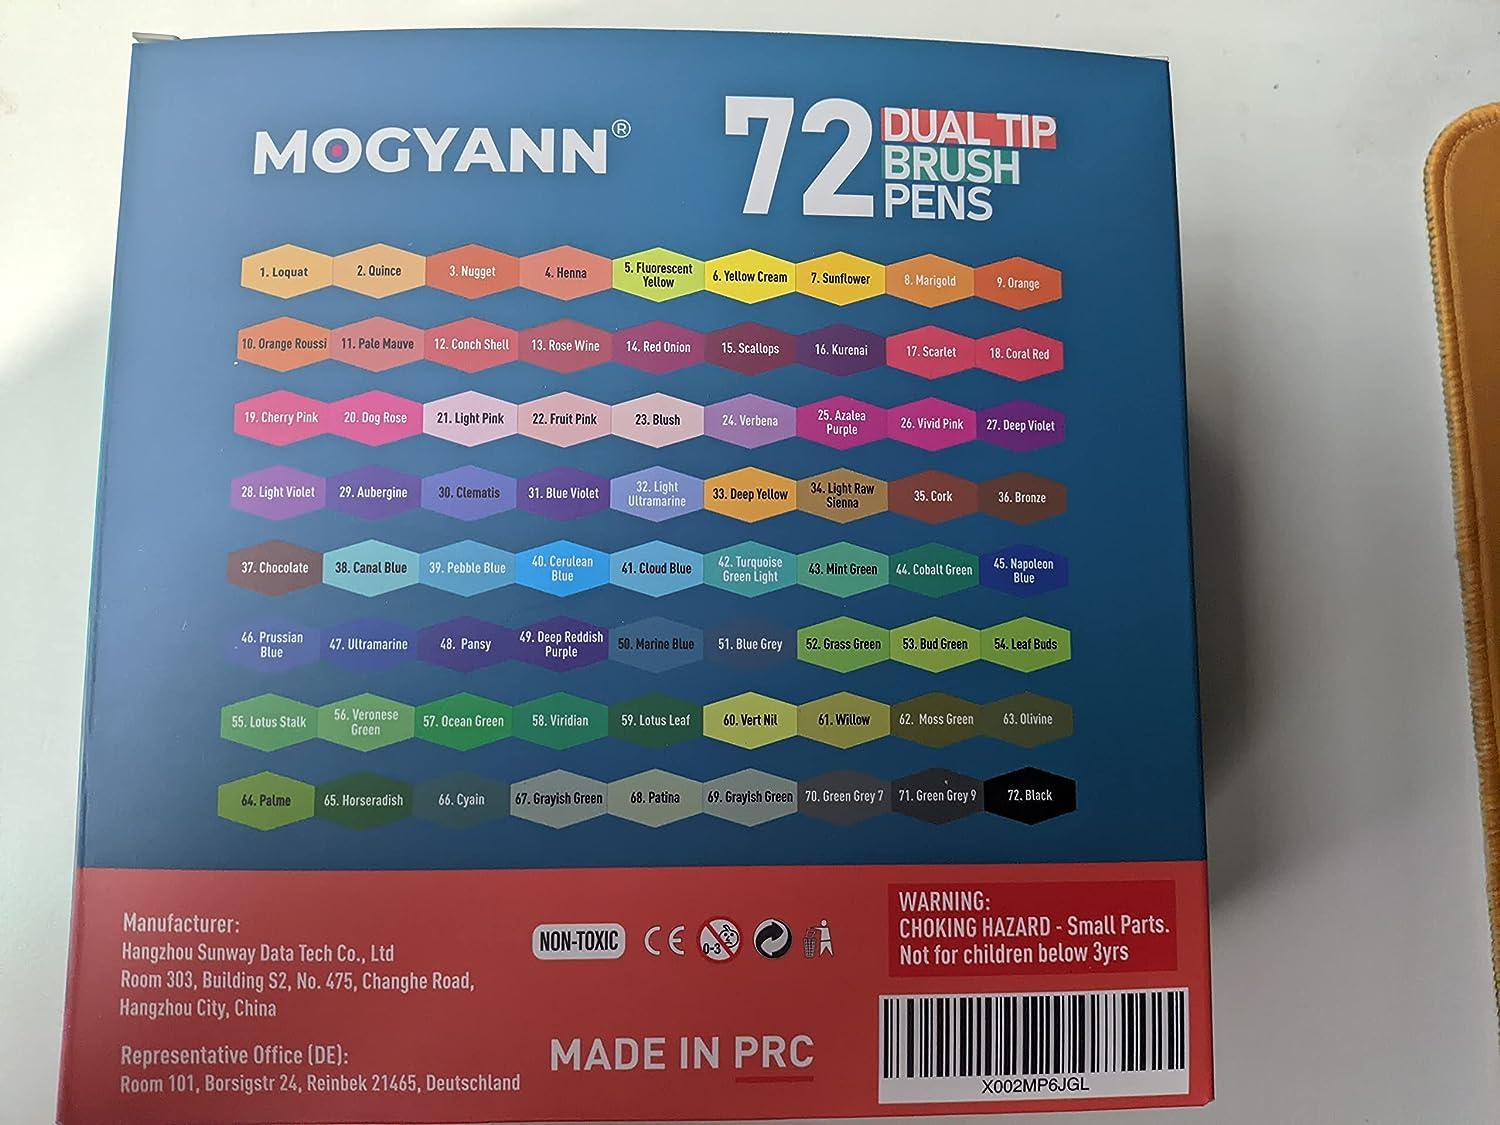 Mogyann 72 Colors Markers for Adult Coloring Books Dual Tip Pens with